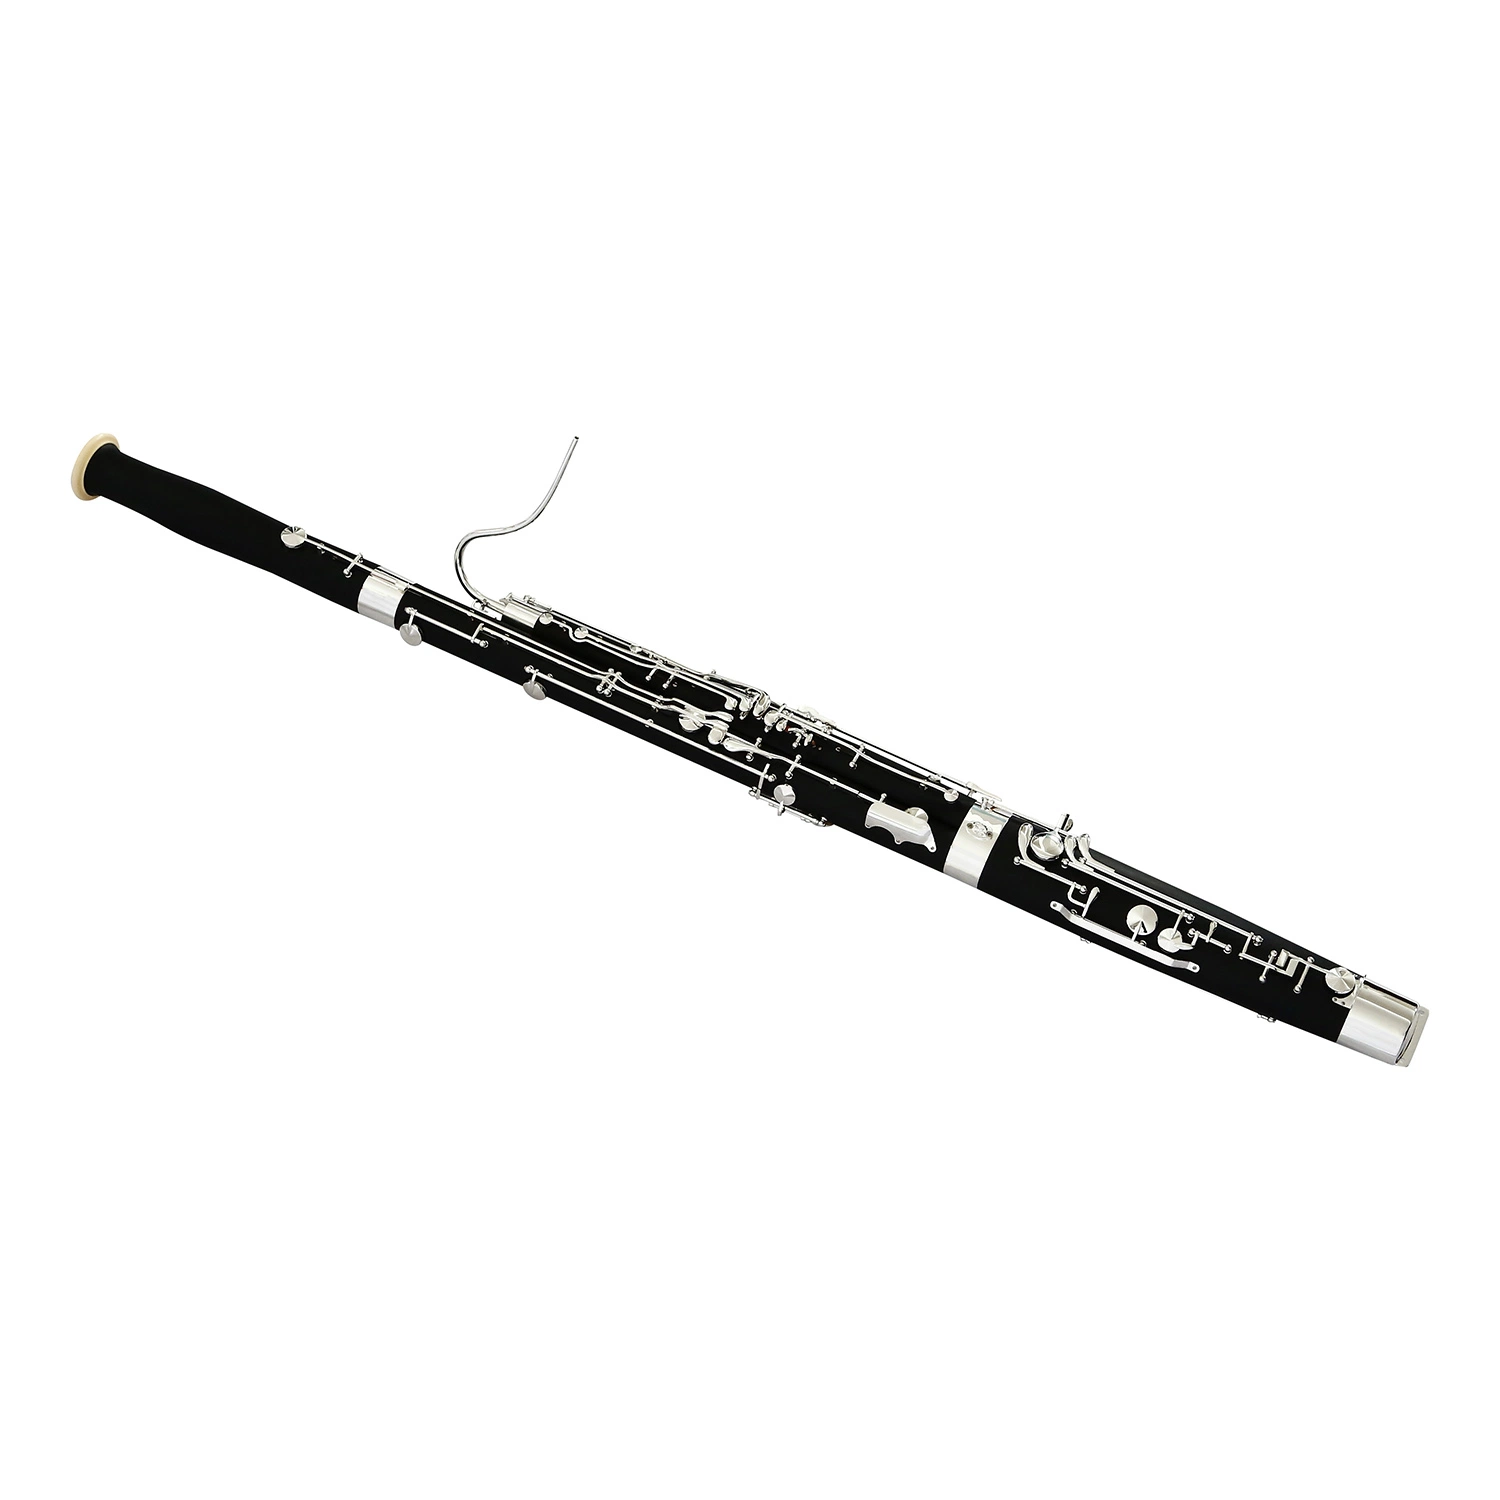 Wholesale Bassoon Woodwind Musical Instrument. Made in China